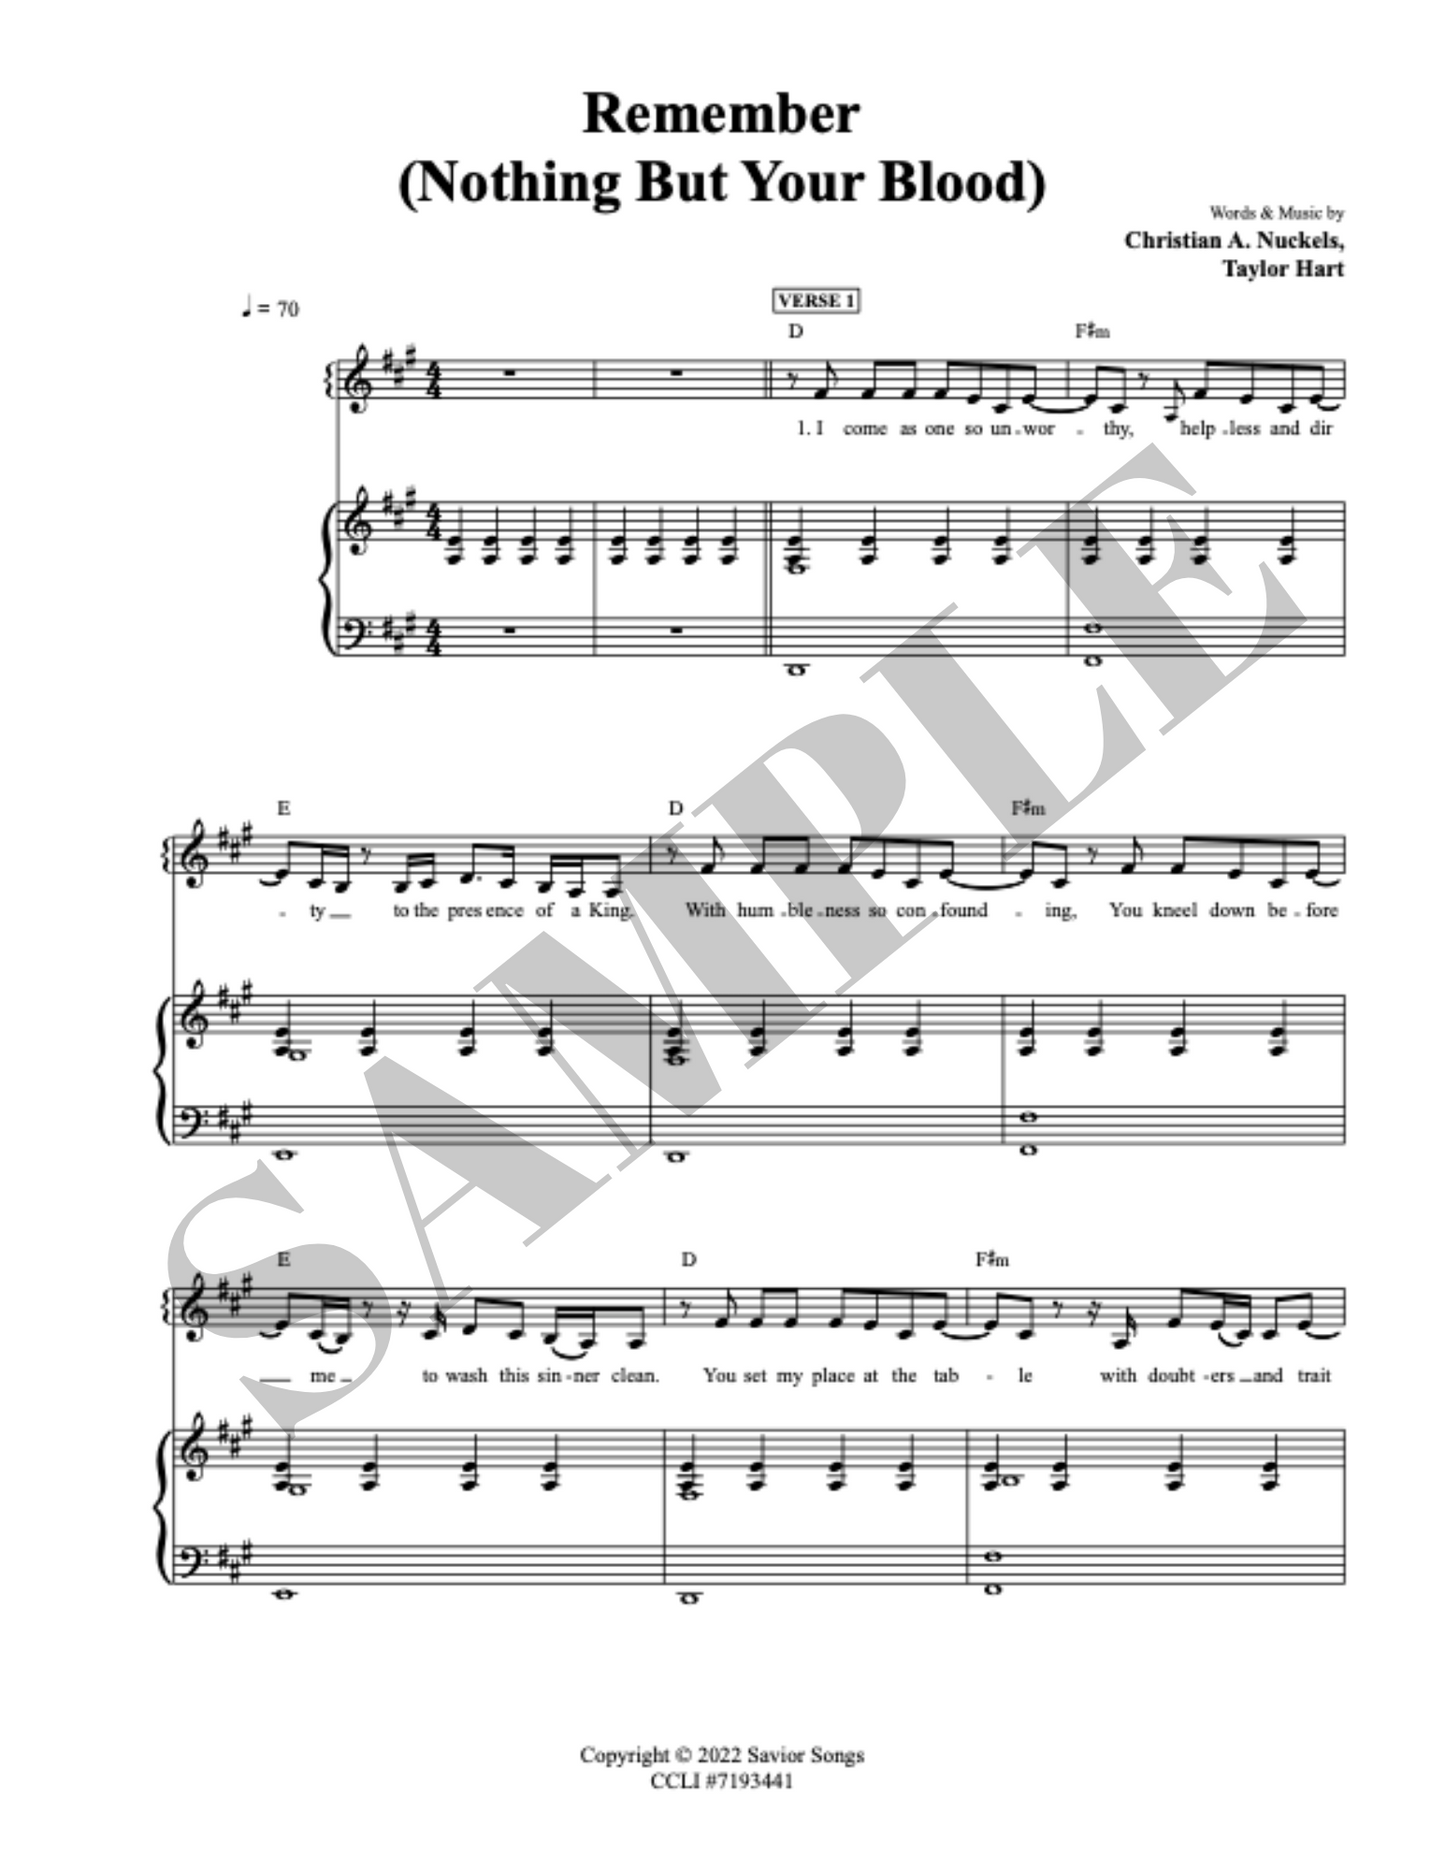 Remember (Nothing But Your Blood) Piano Lead Sheet